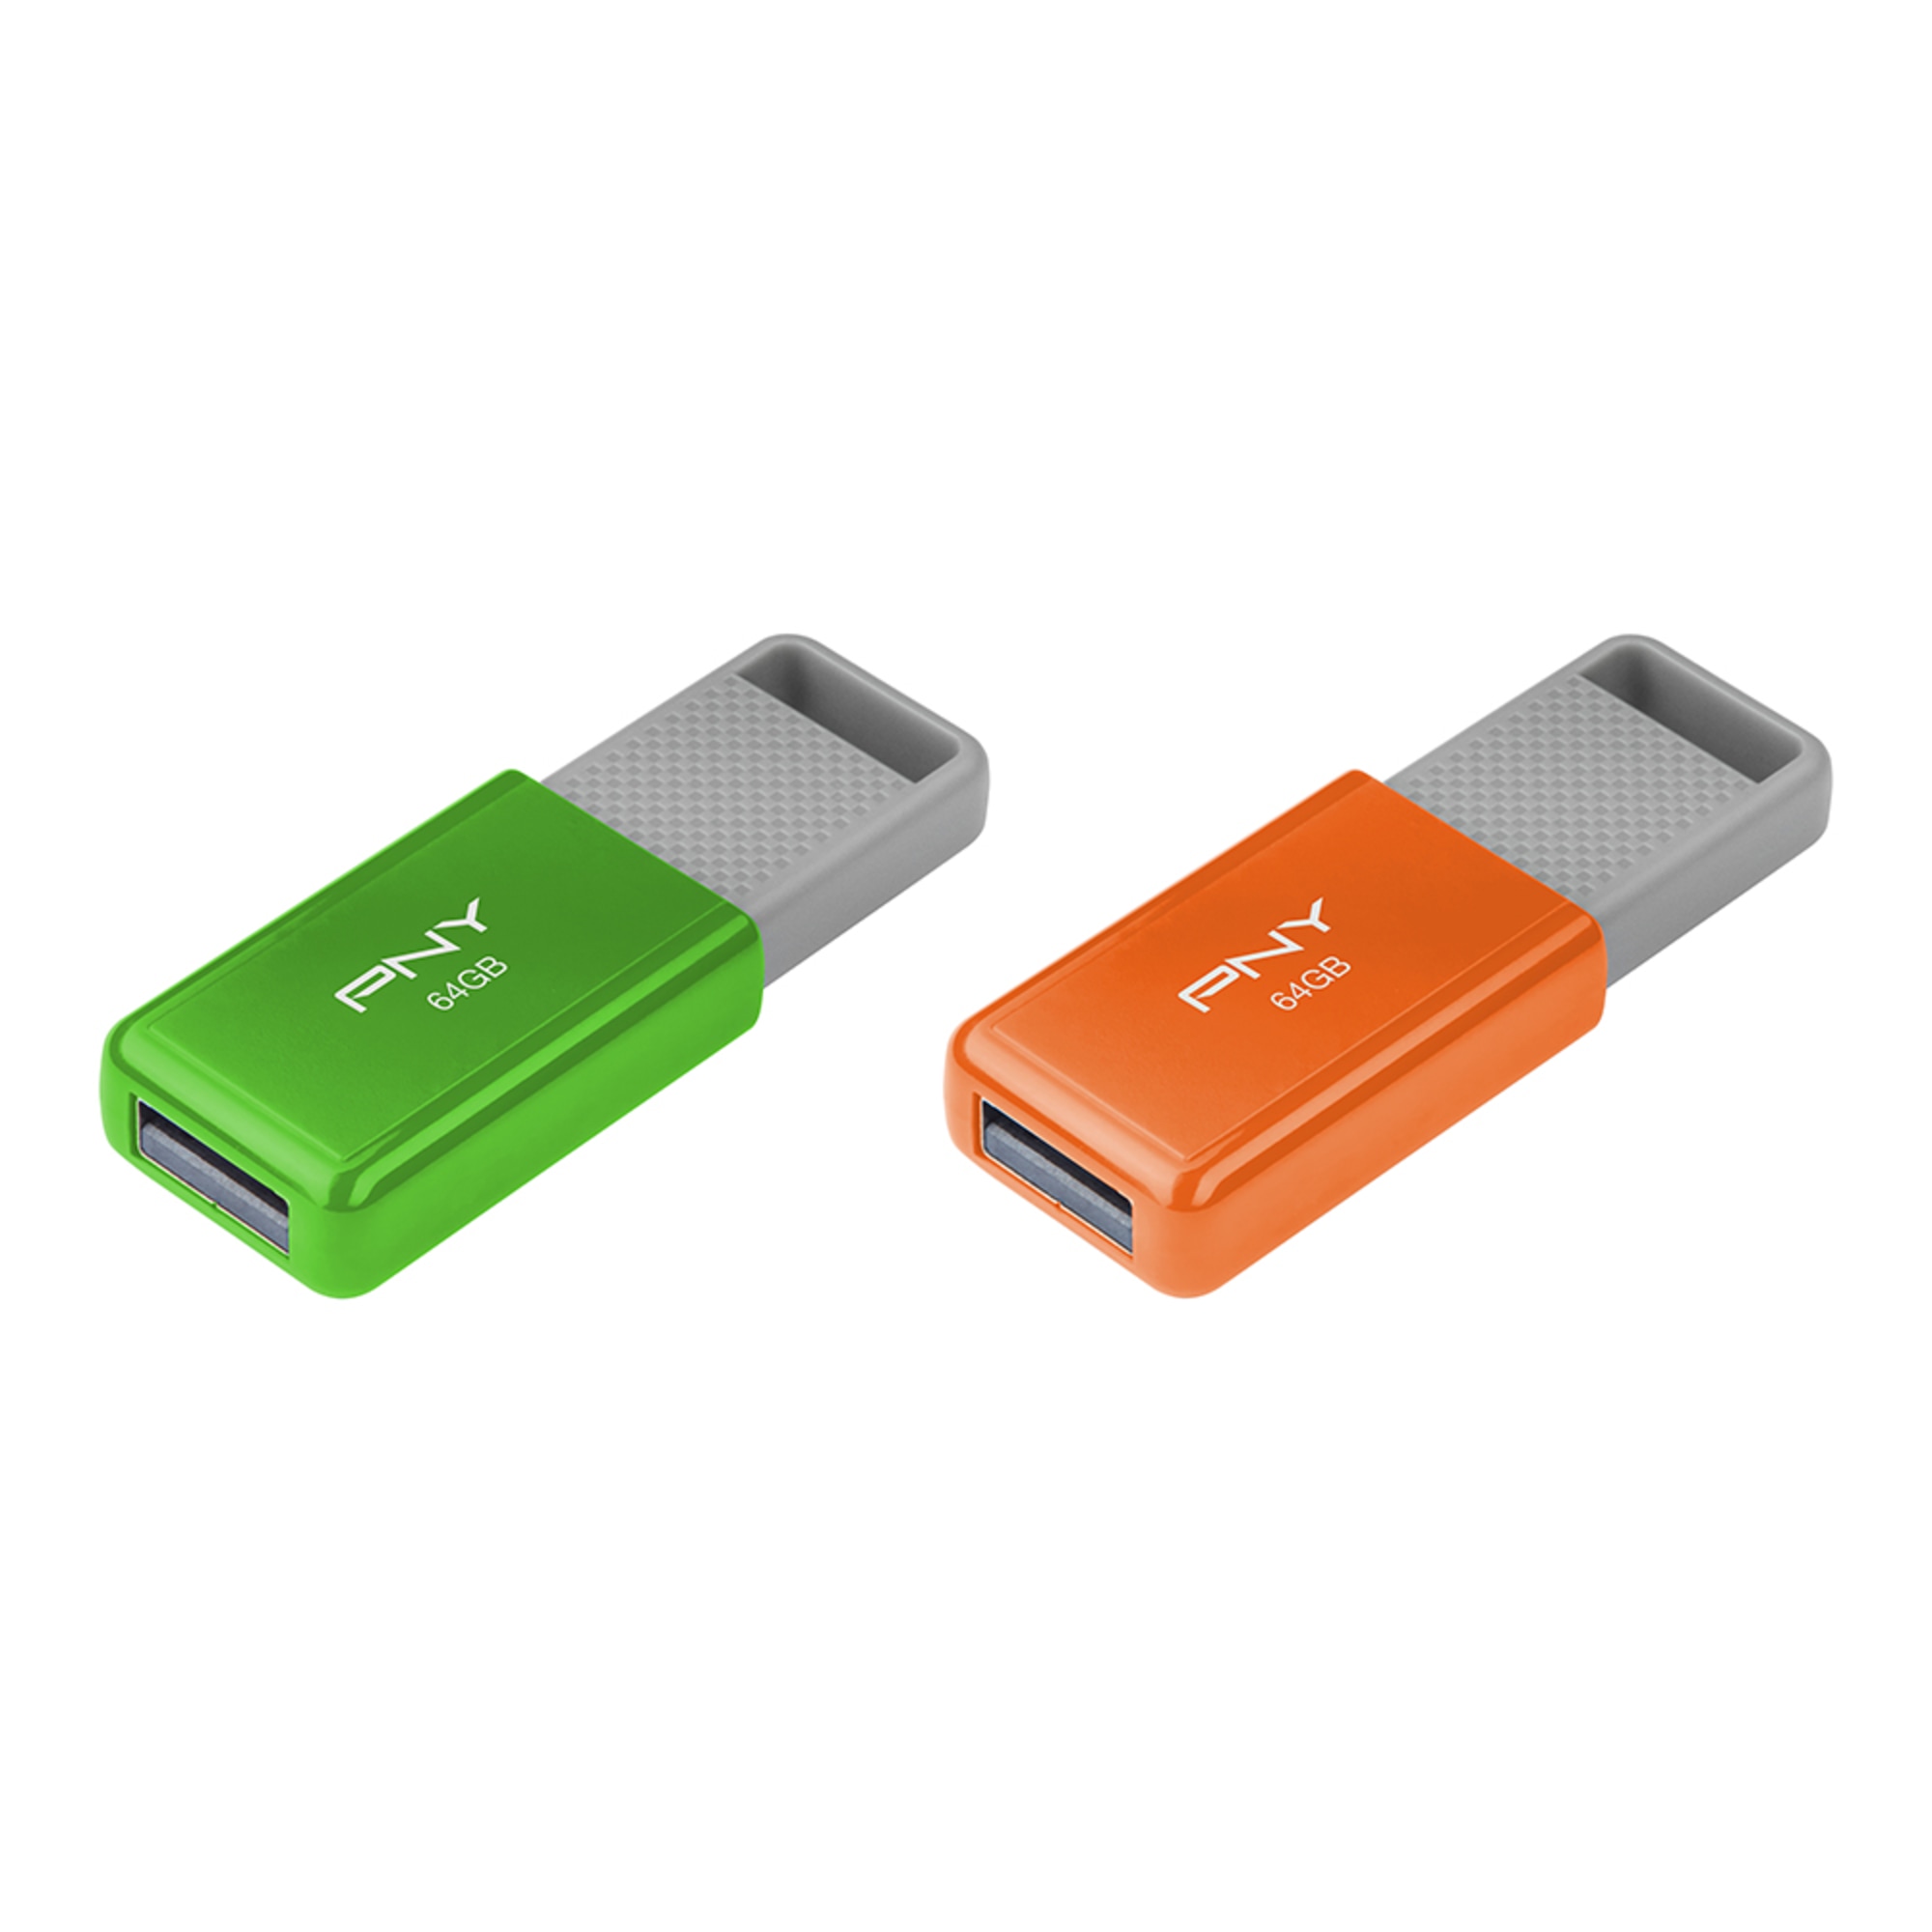 PNY USB 2.0 Flash Drives, 64GB, Pack Of 2 Flash Drives - image 3 of 7